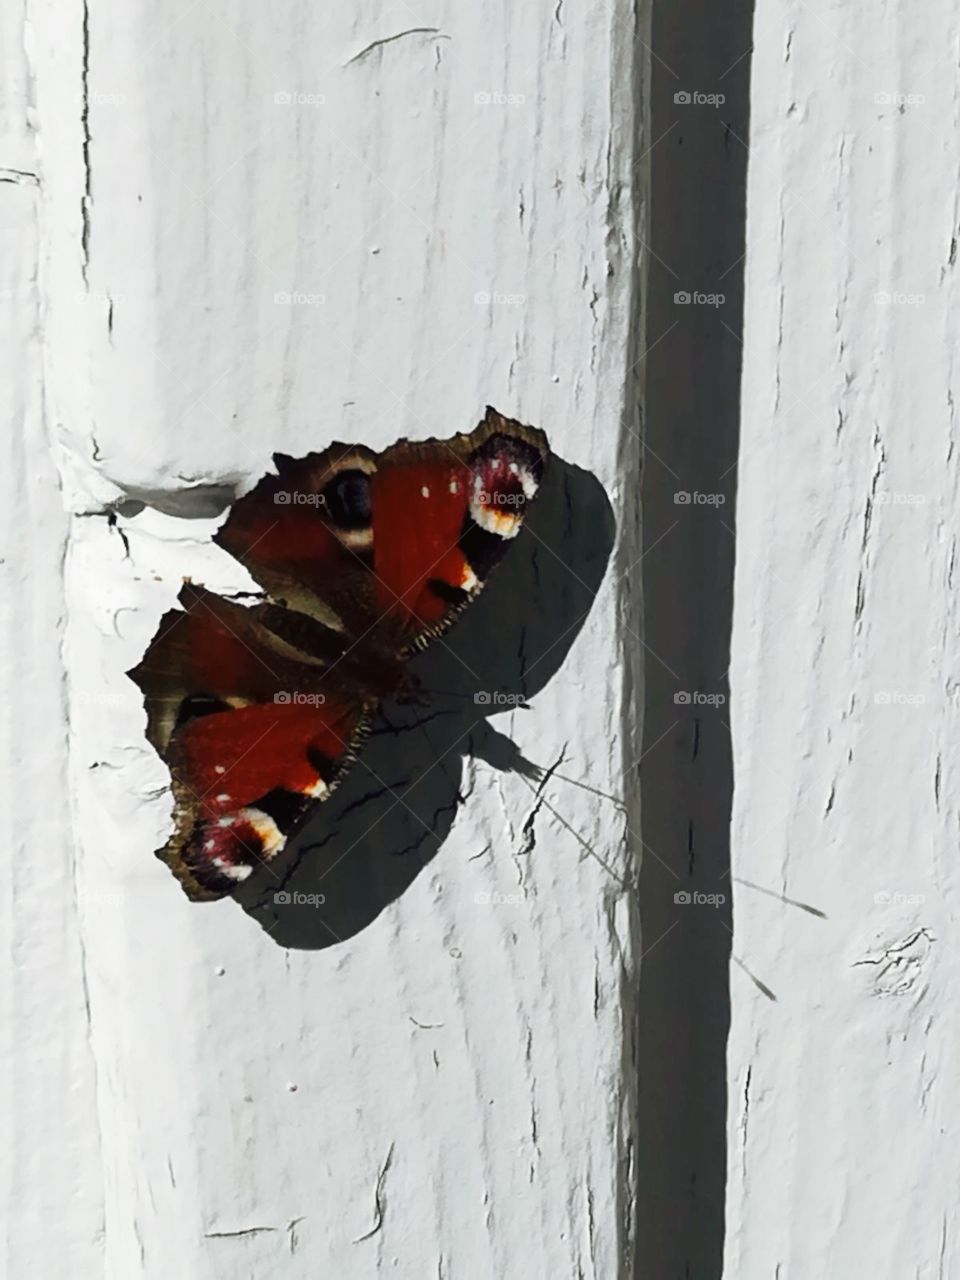 Butterflies Brings Spring! European peacock, shadow and white wall makes raw contrasts photo.